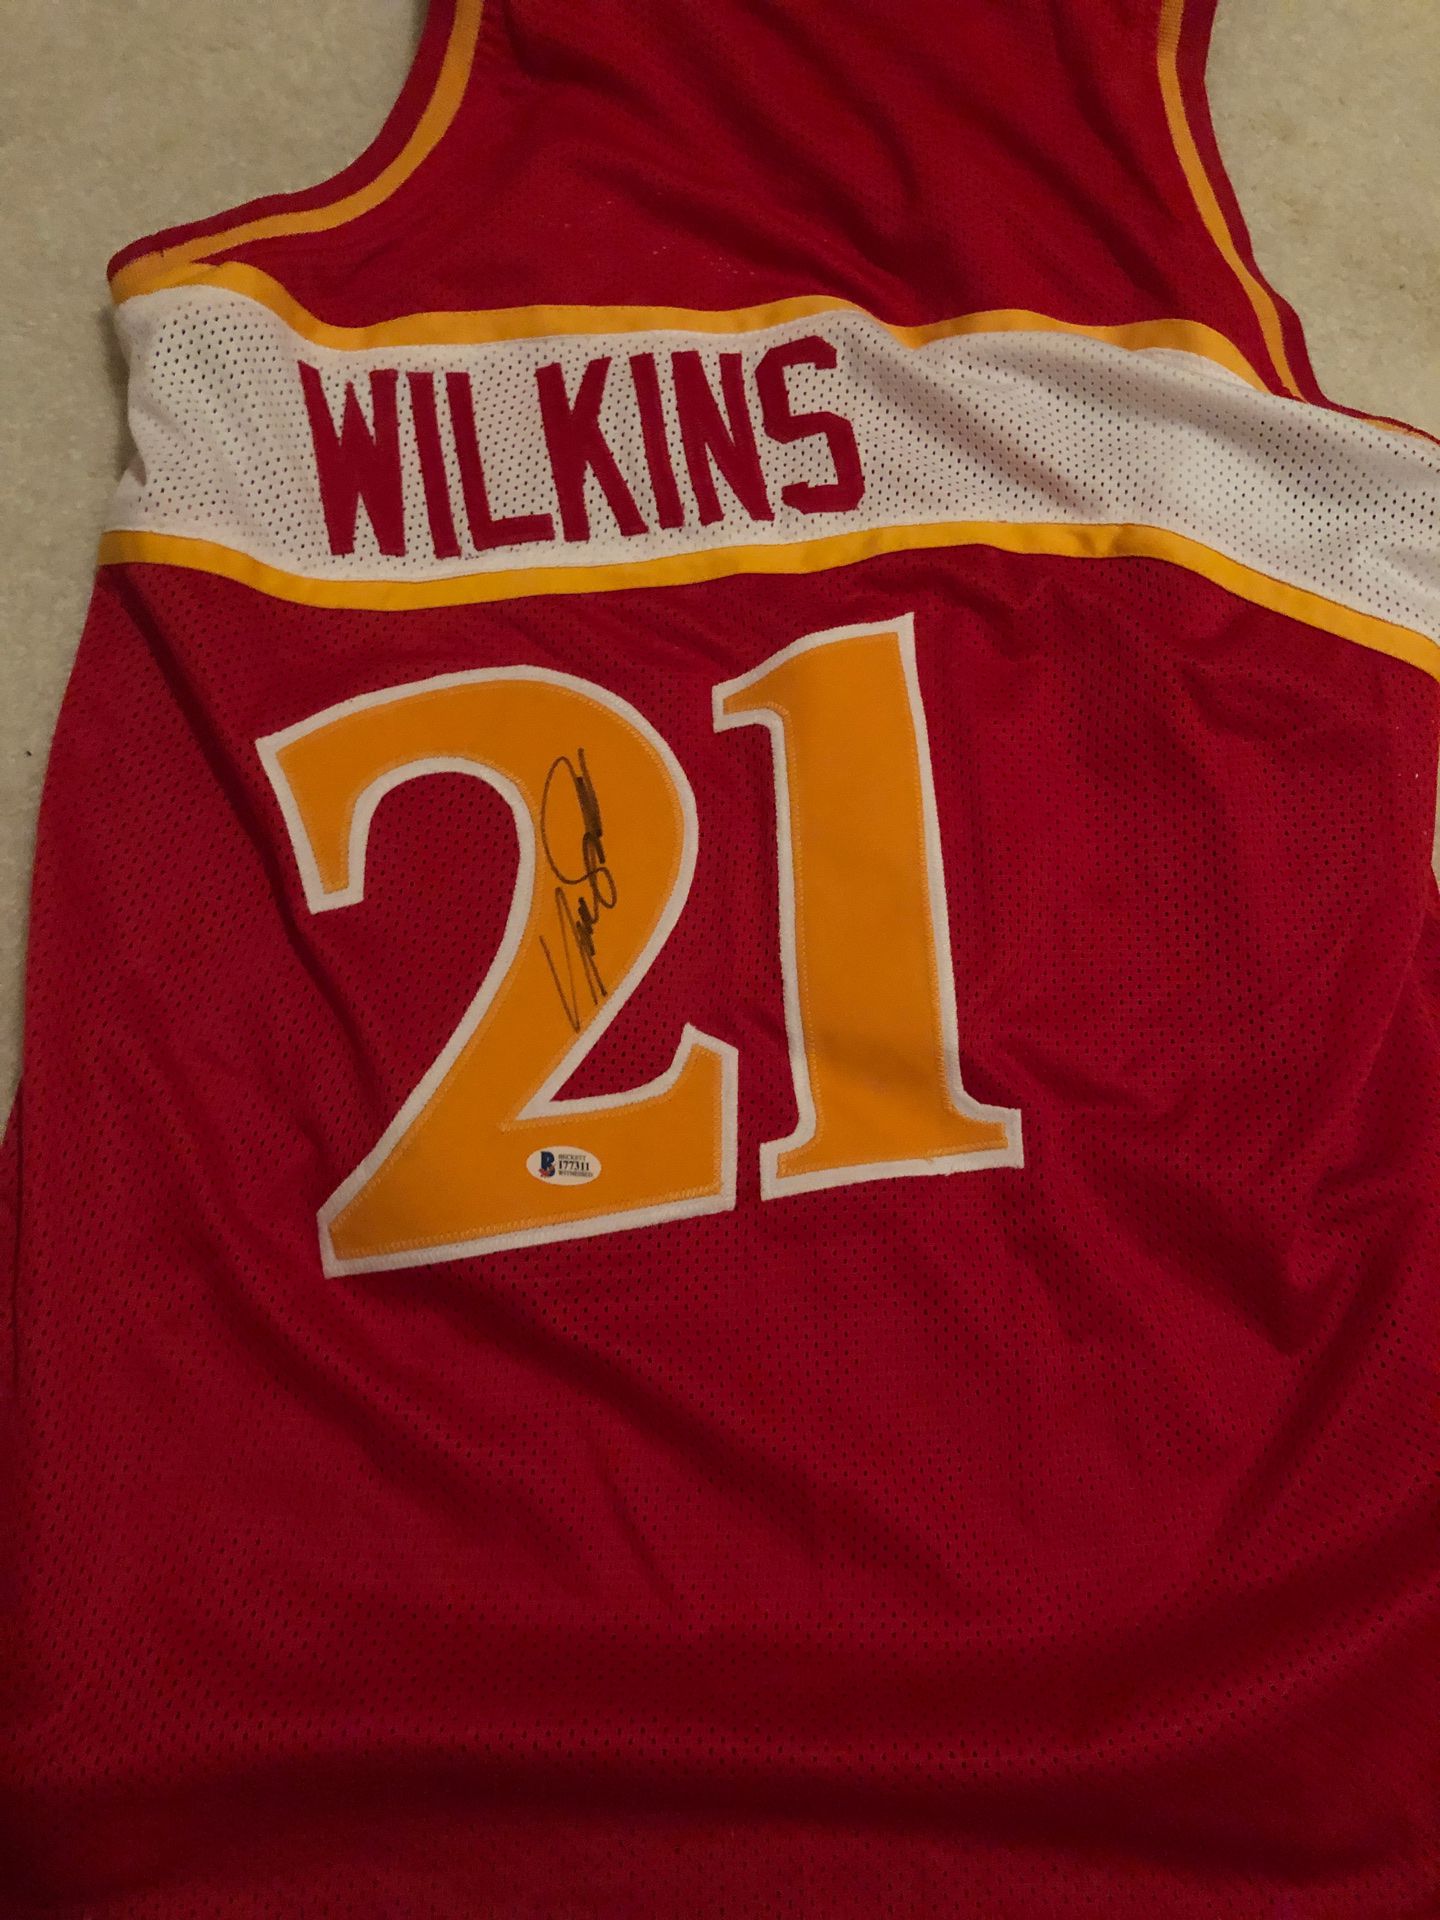 Wilkins signed jersey